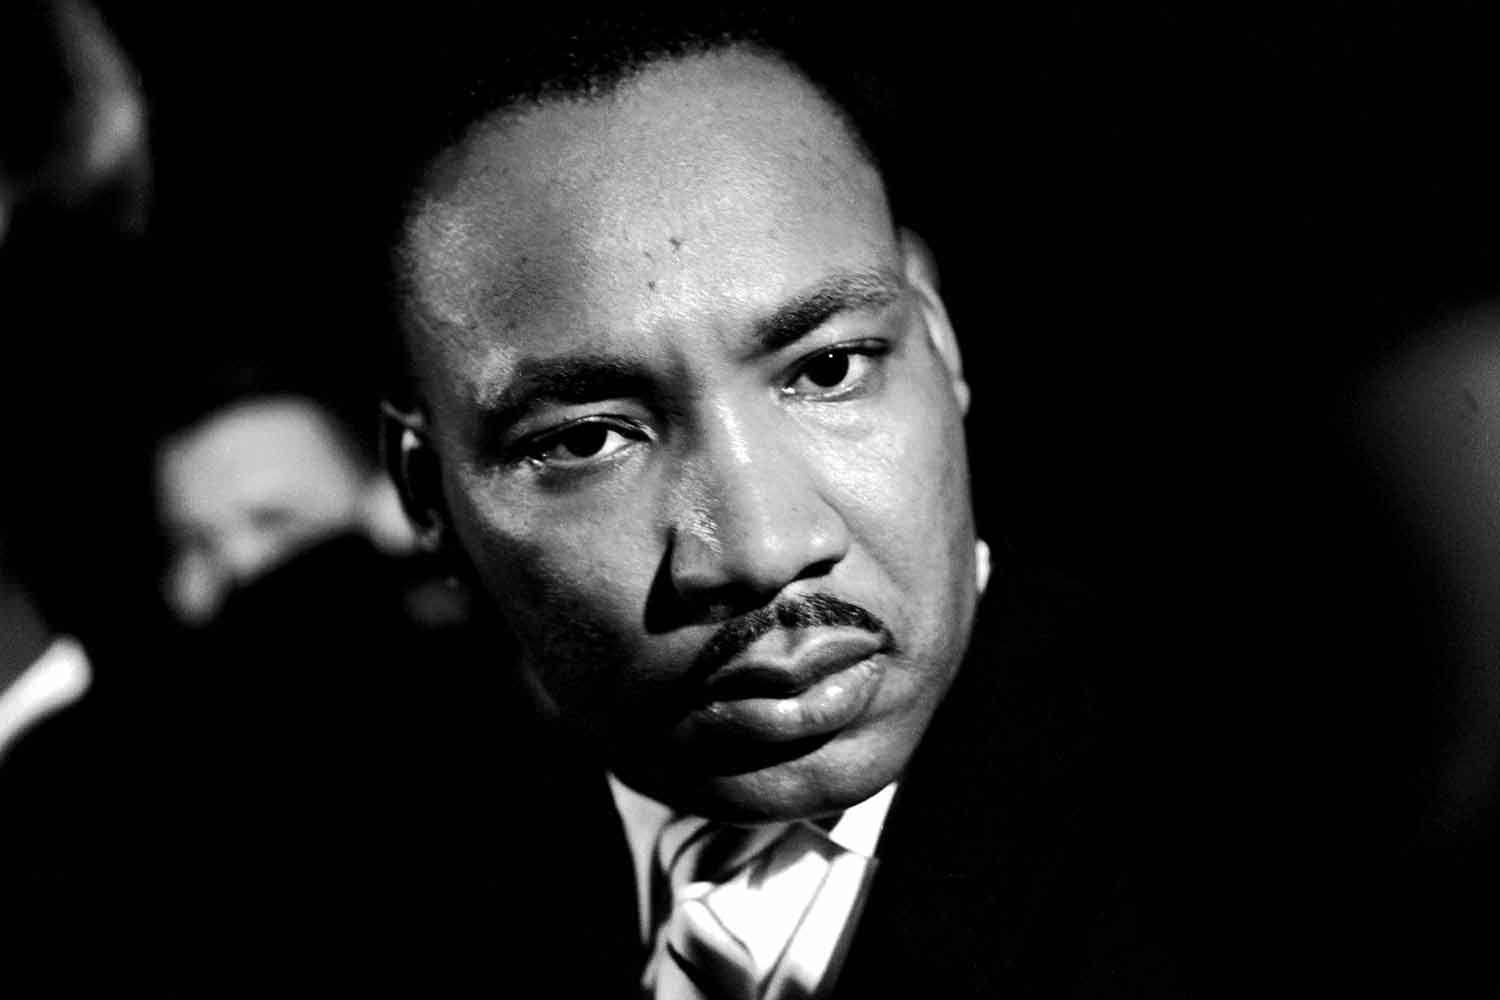 Martin Luther King Jr Picture Wallpaper Inx